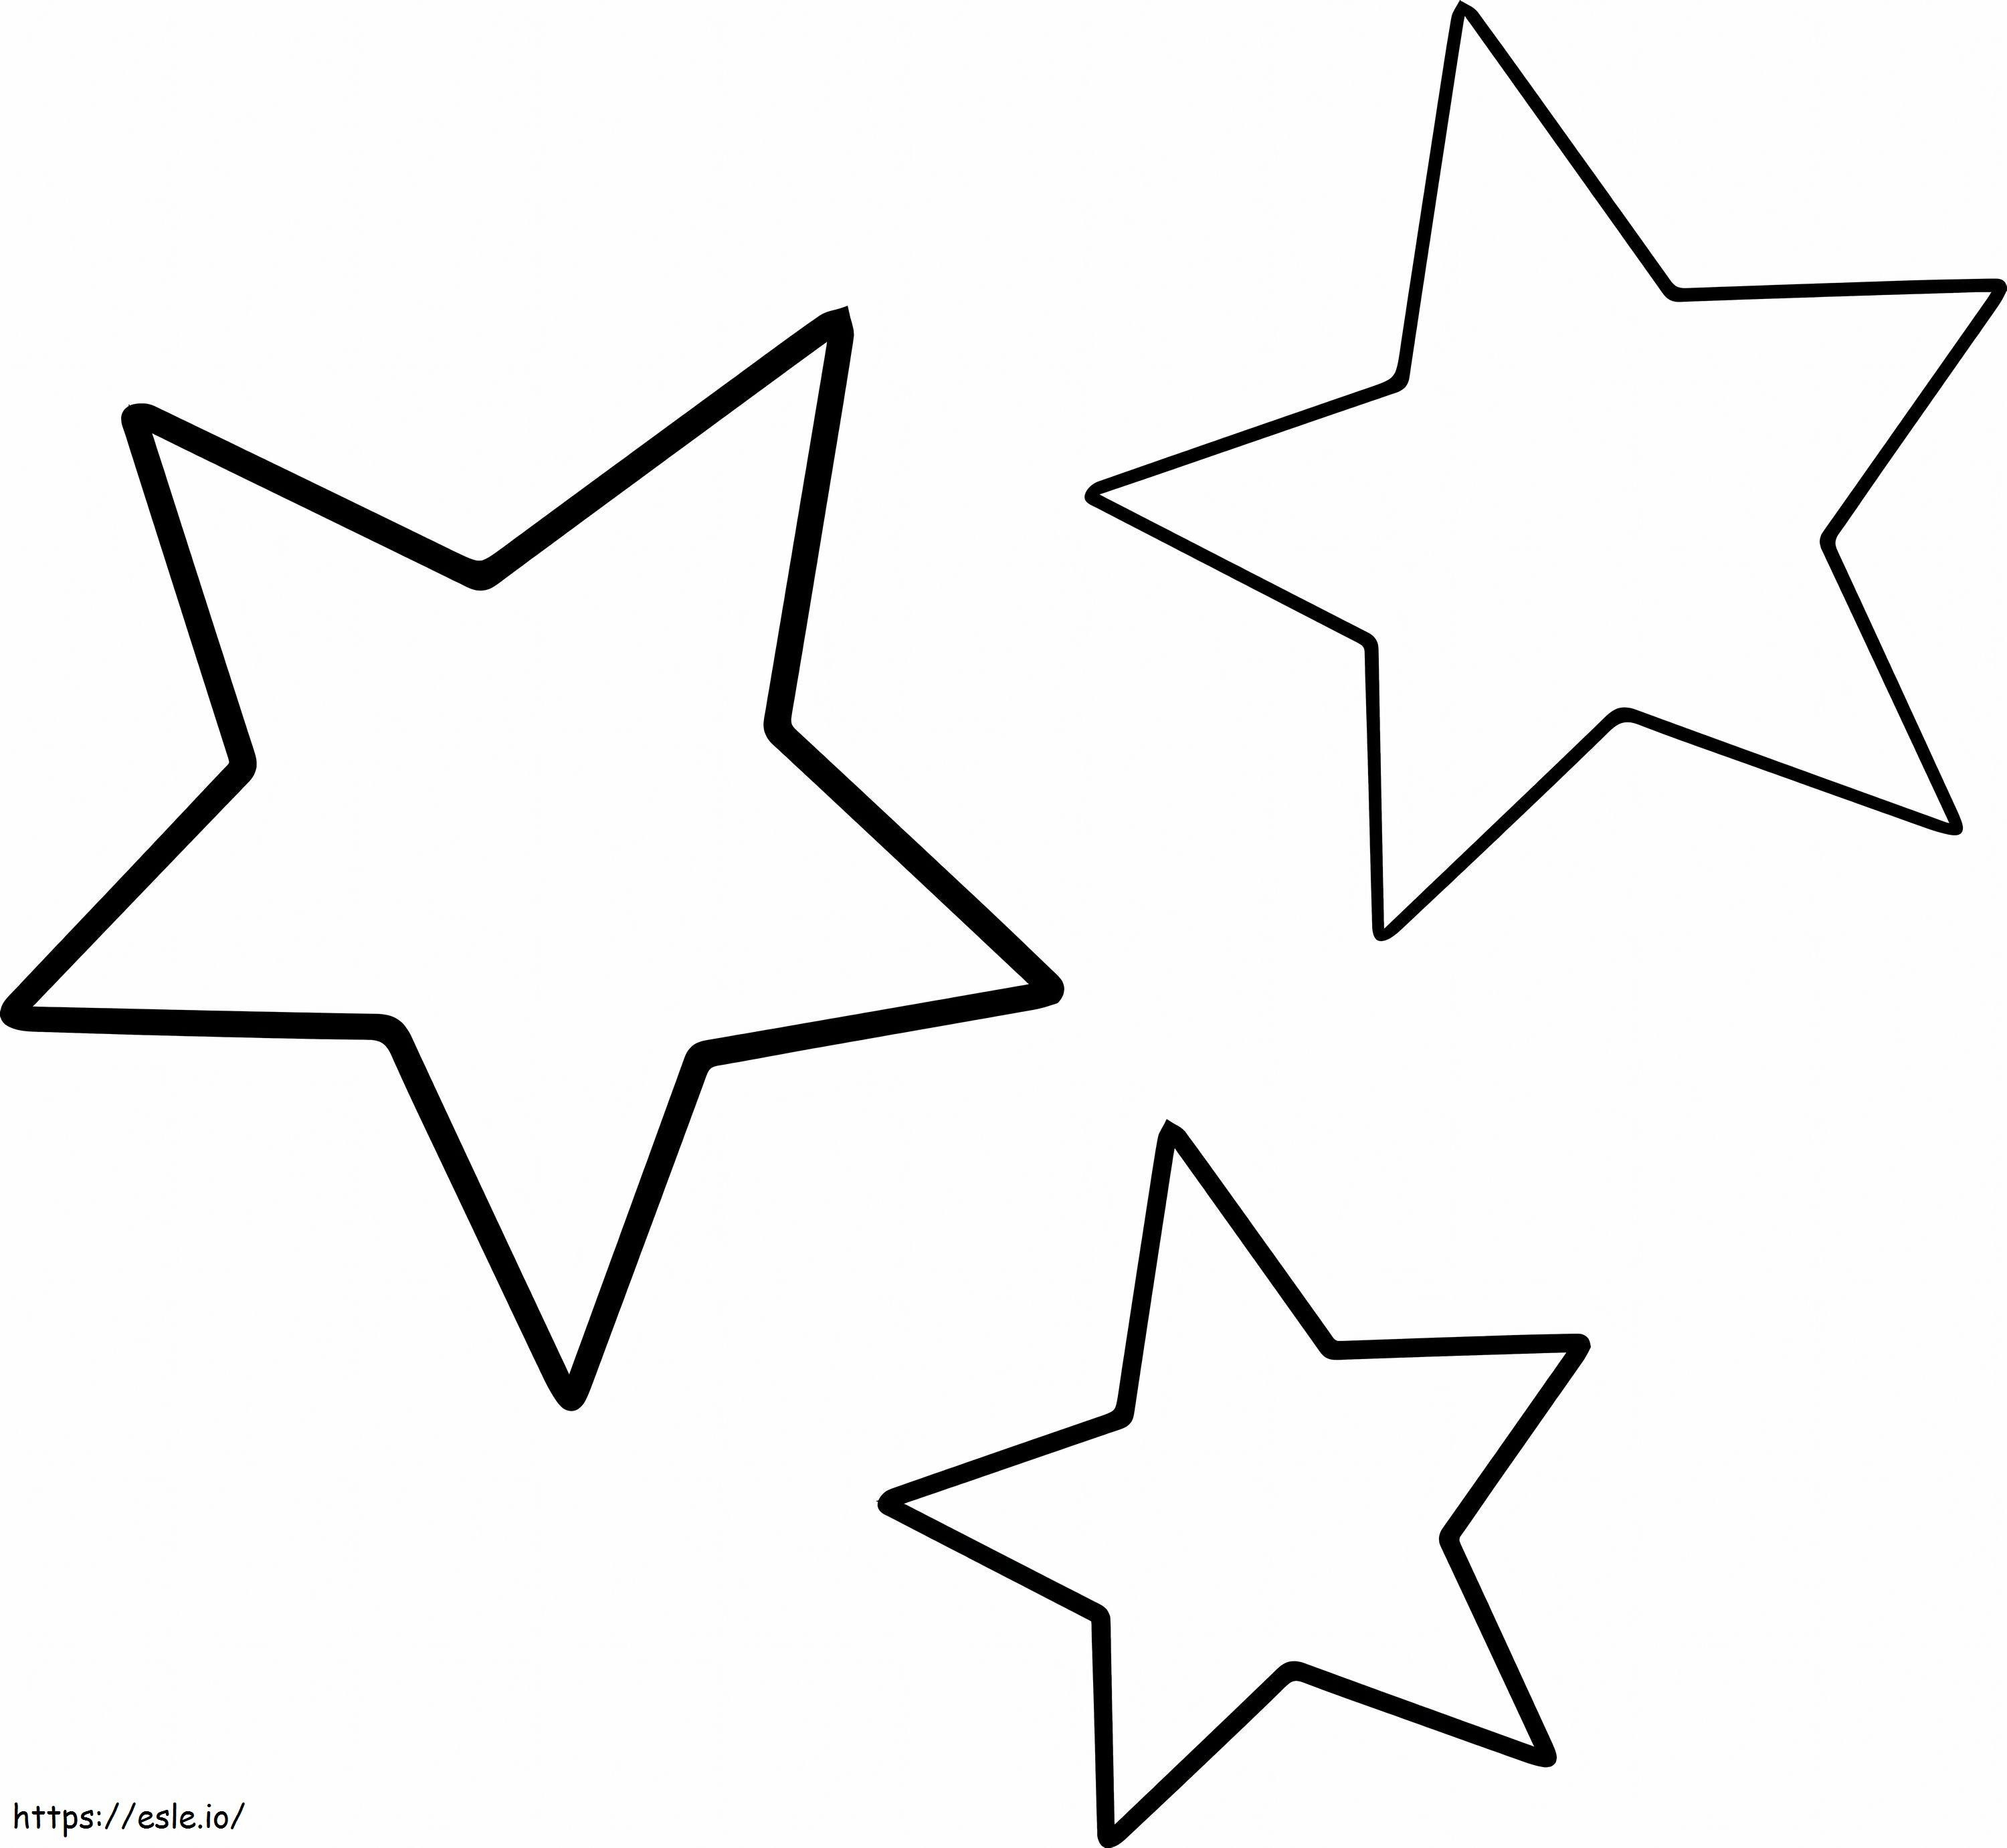 Three Stars coloring page